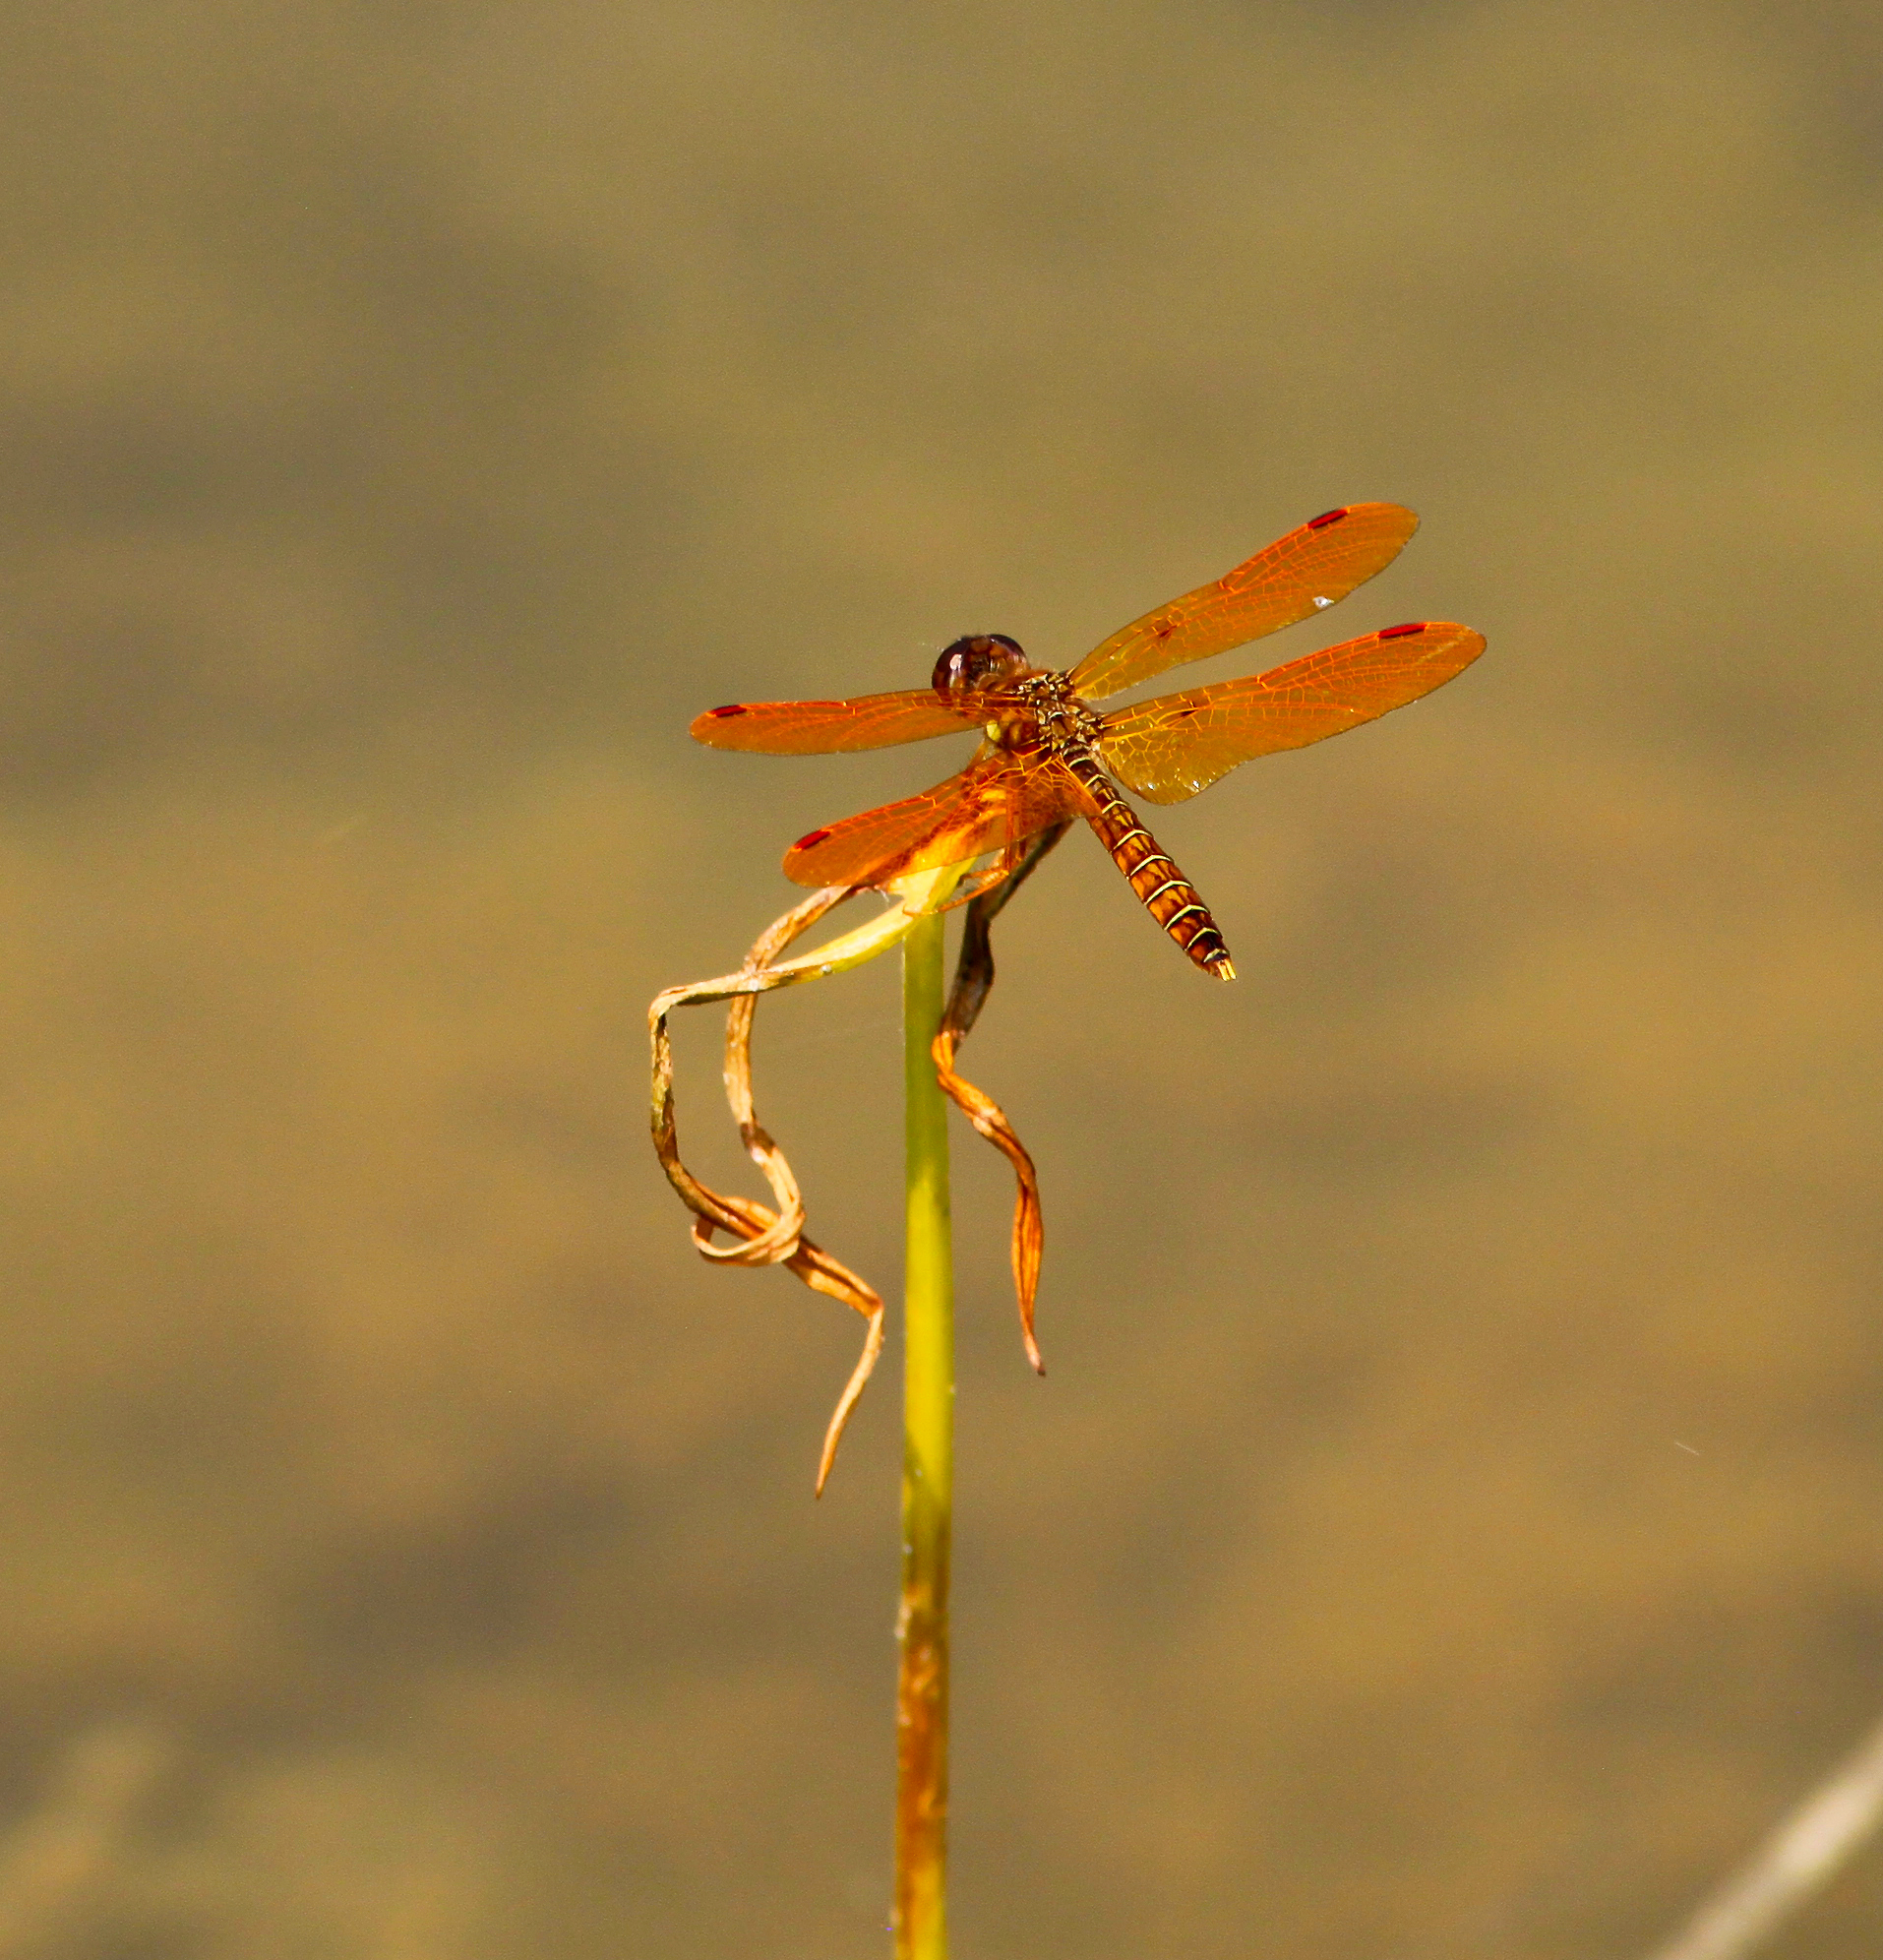 Eastern amberwing is among the smallest dragonflies, and visits Loch Lomond beach by the lily pads and pickerel weed, snatching mosquitoes and other insects.